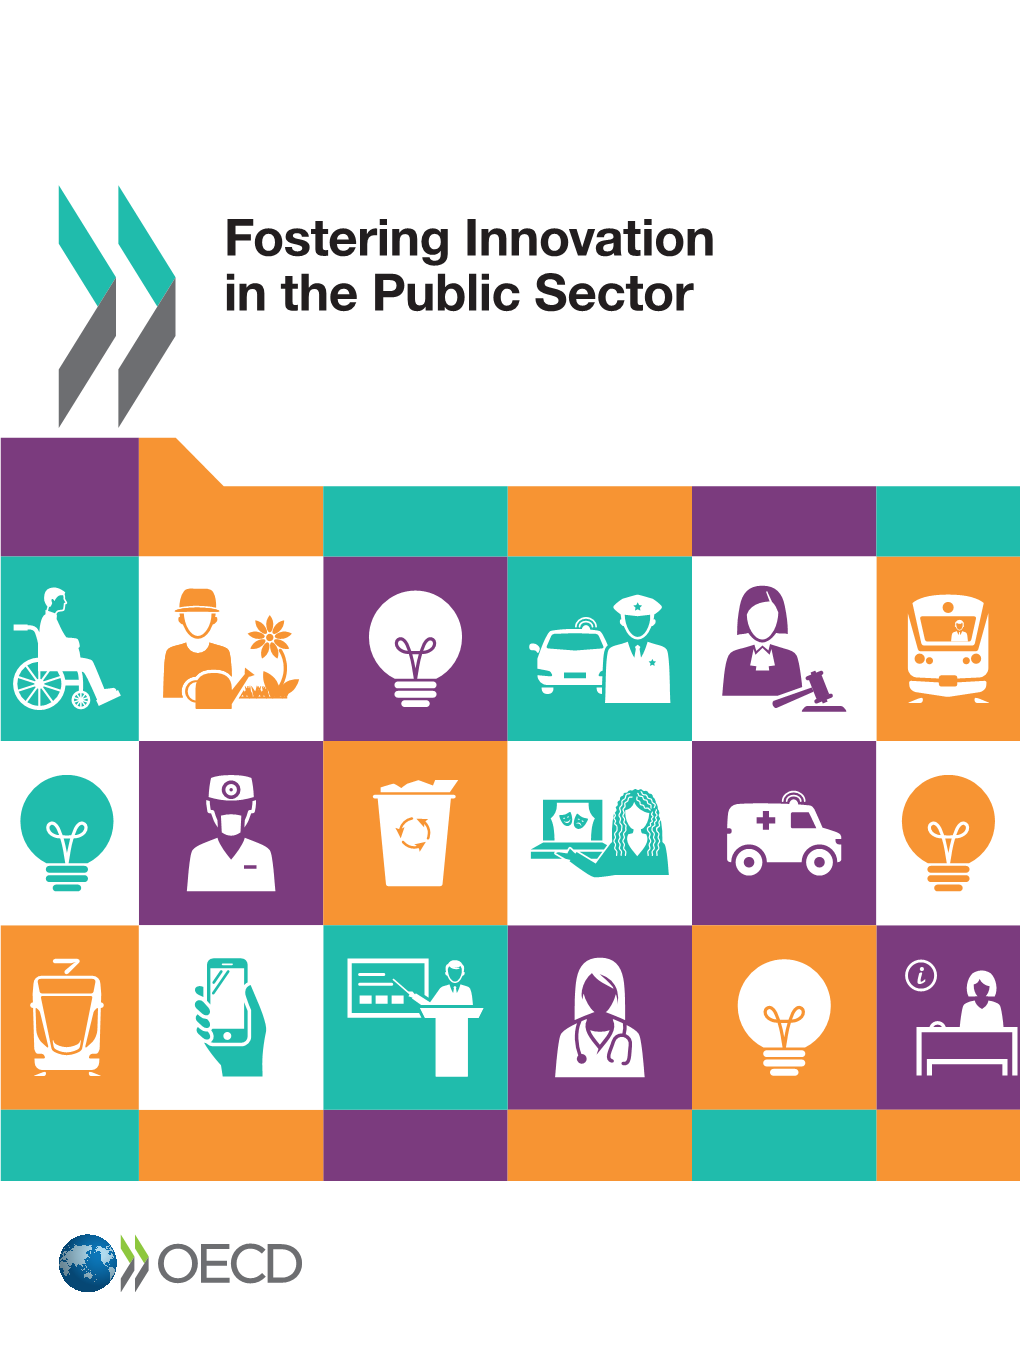 Fostering Innovation in the Public Sector Public Sector Public the in Innovation Fostering